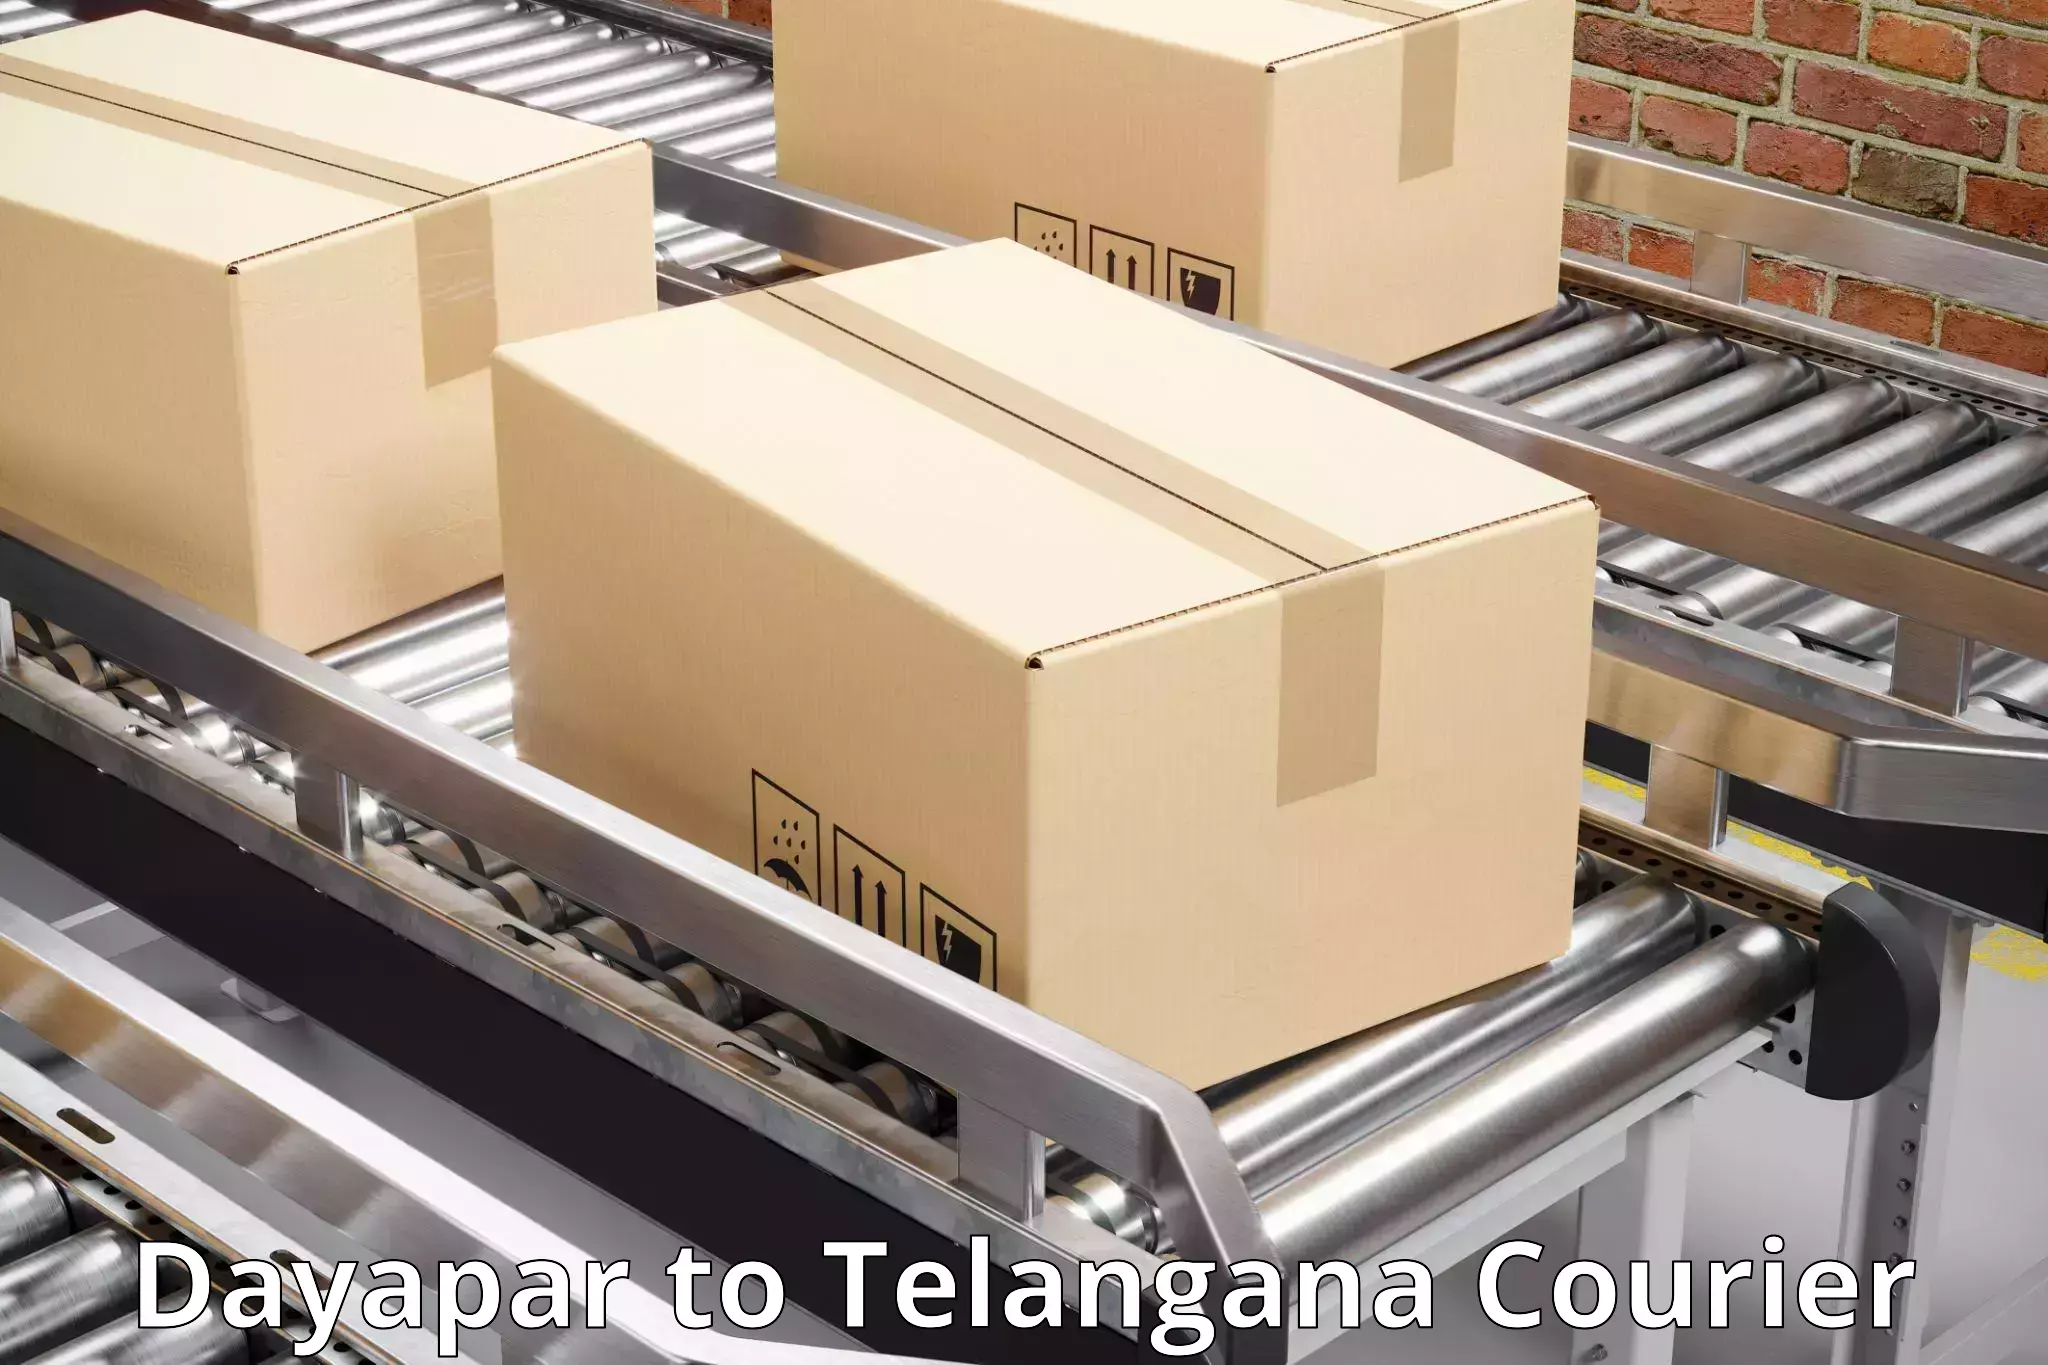 Same-day delivery solutions Dayapar to Secunderabad